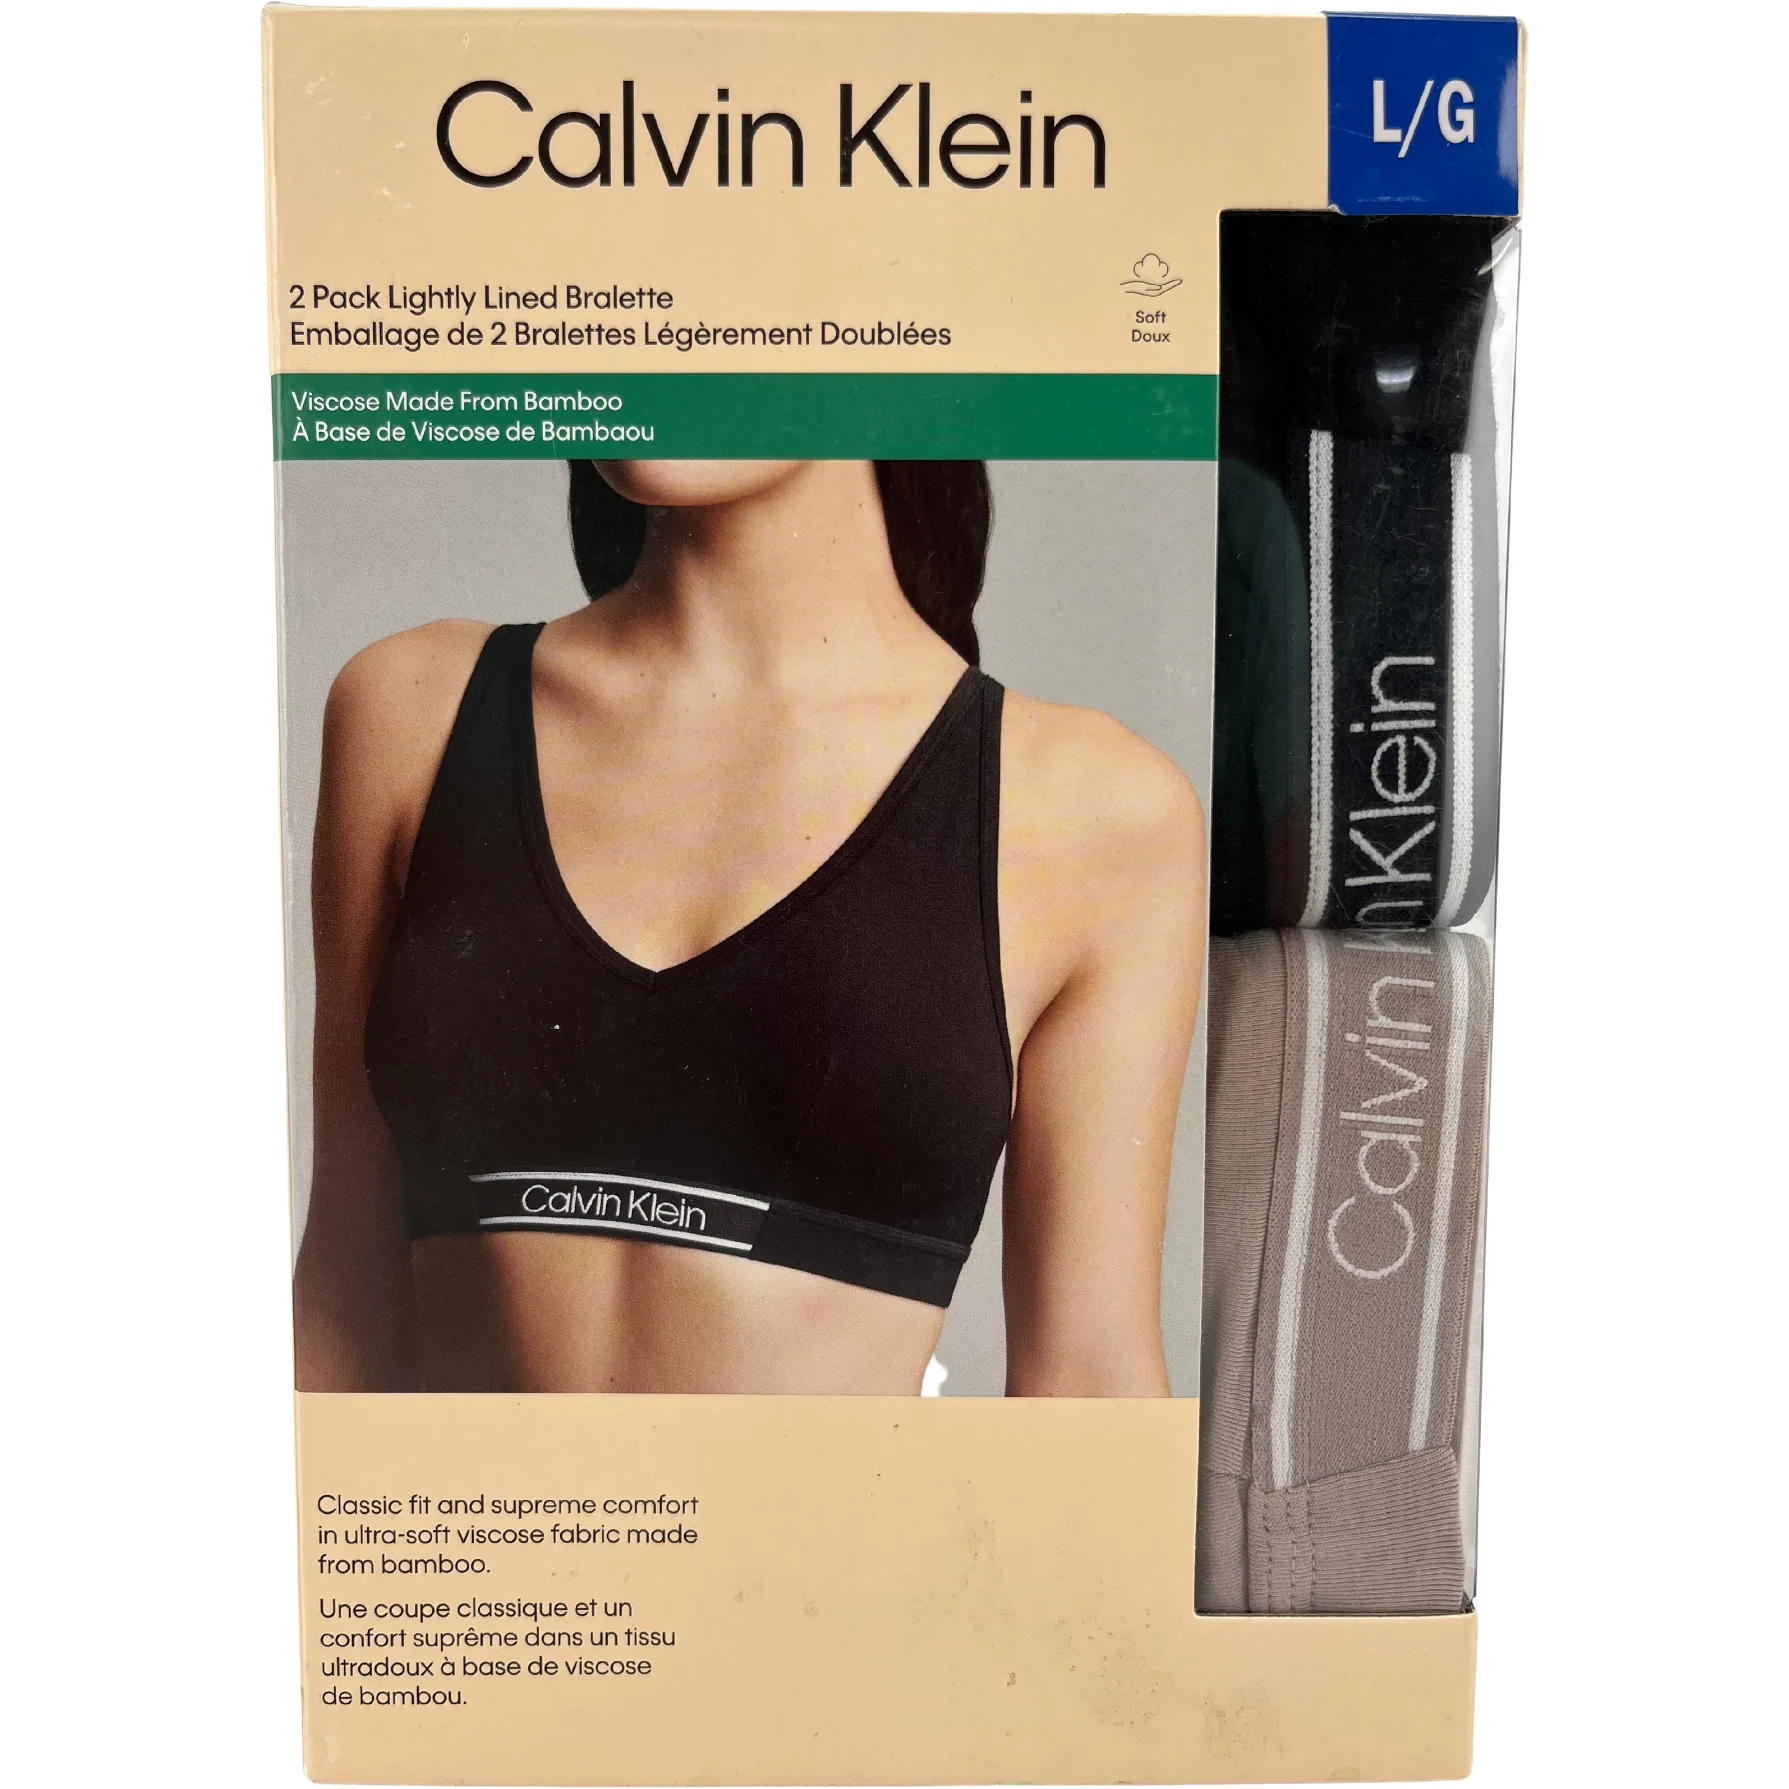 https://www.canadawideliquidations.com/wp-content/uploads/2022/08/products-CalvinKleinBra.png